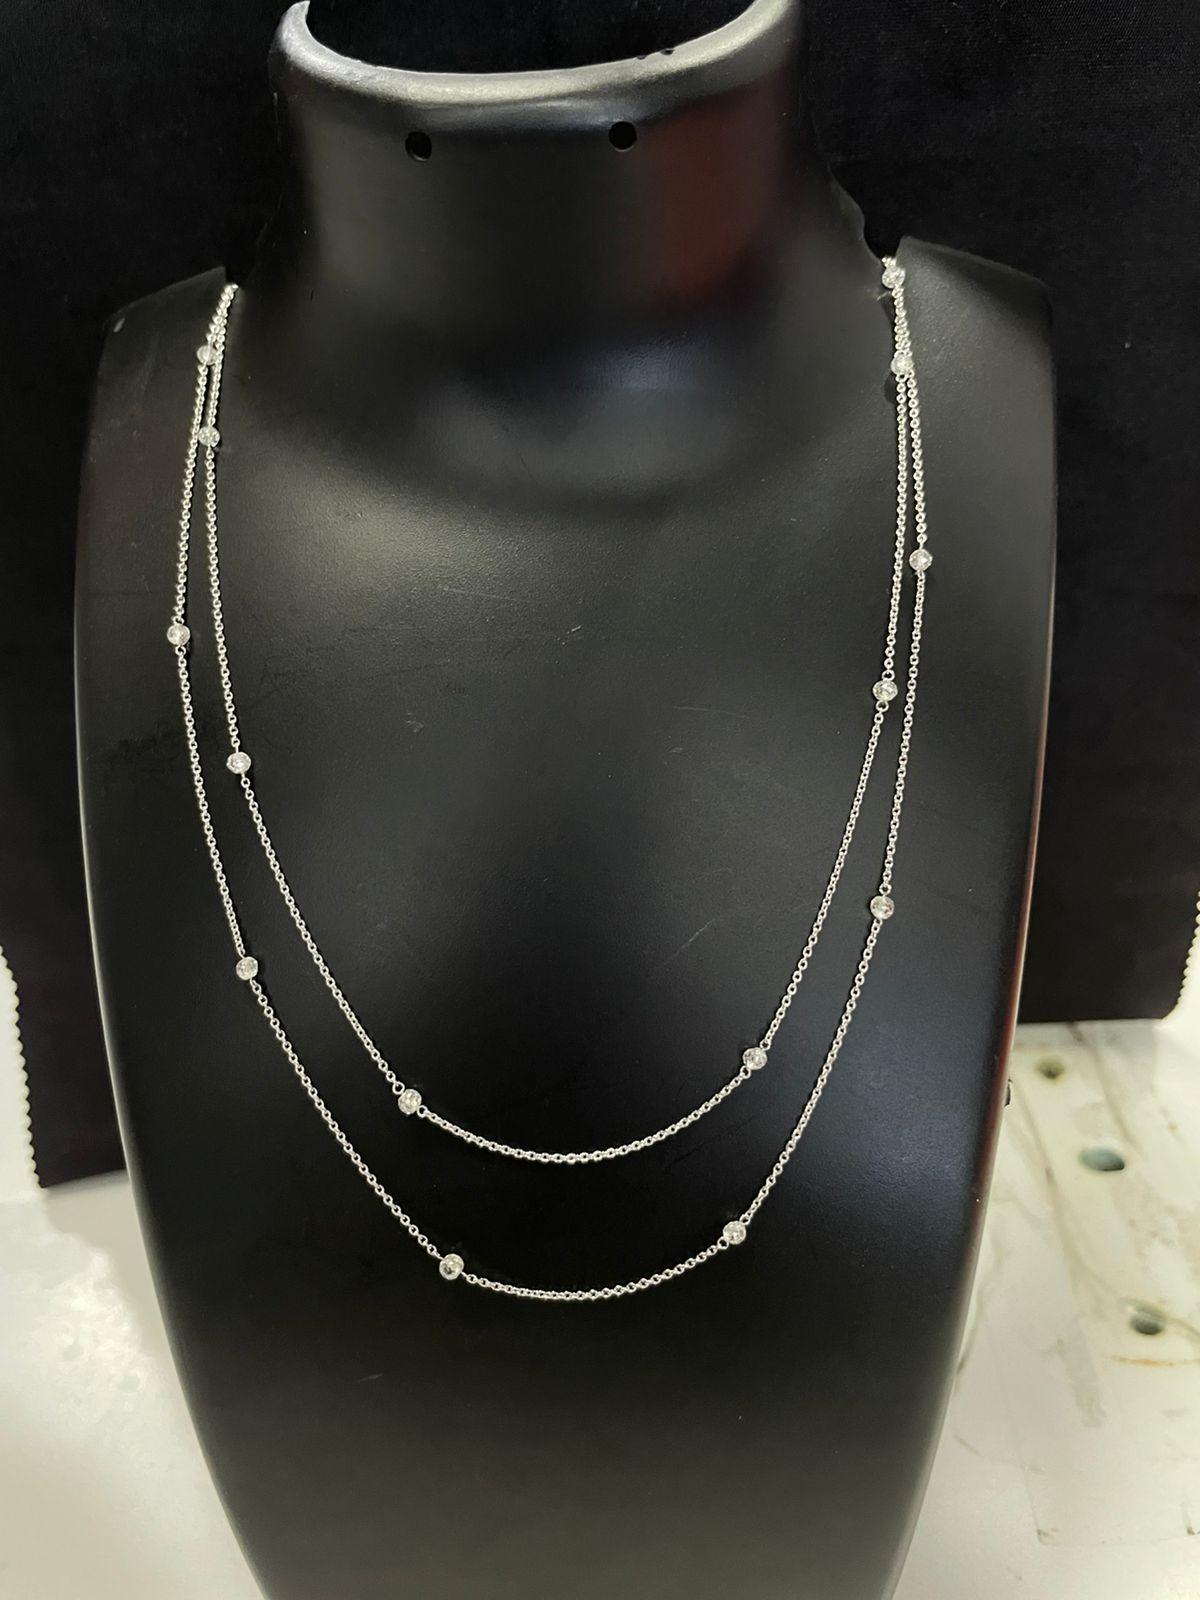 PANIM Beads Diamond 2 Layer Necklace in 18 Karat White Gold In New Condition For Sale In Tsim Sha Tsui, Hong Kong